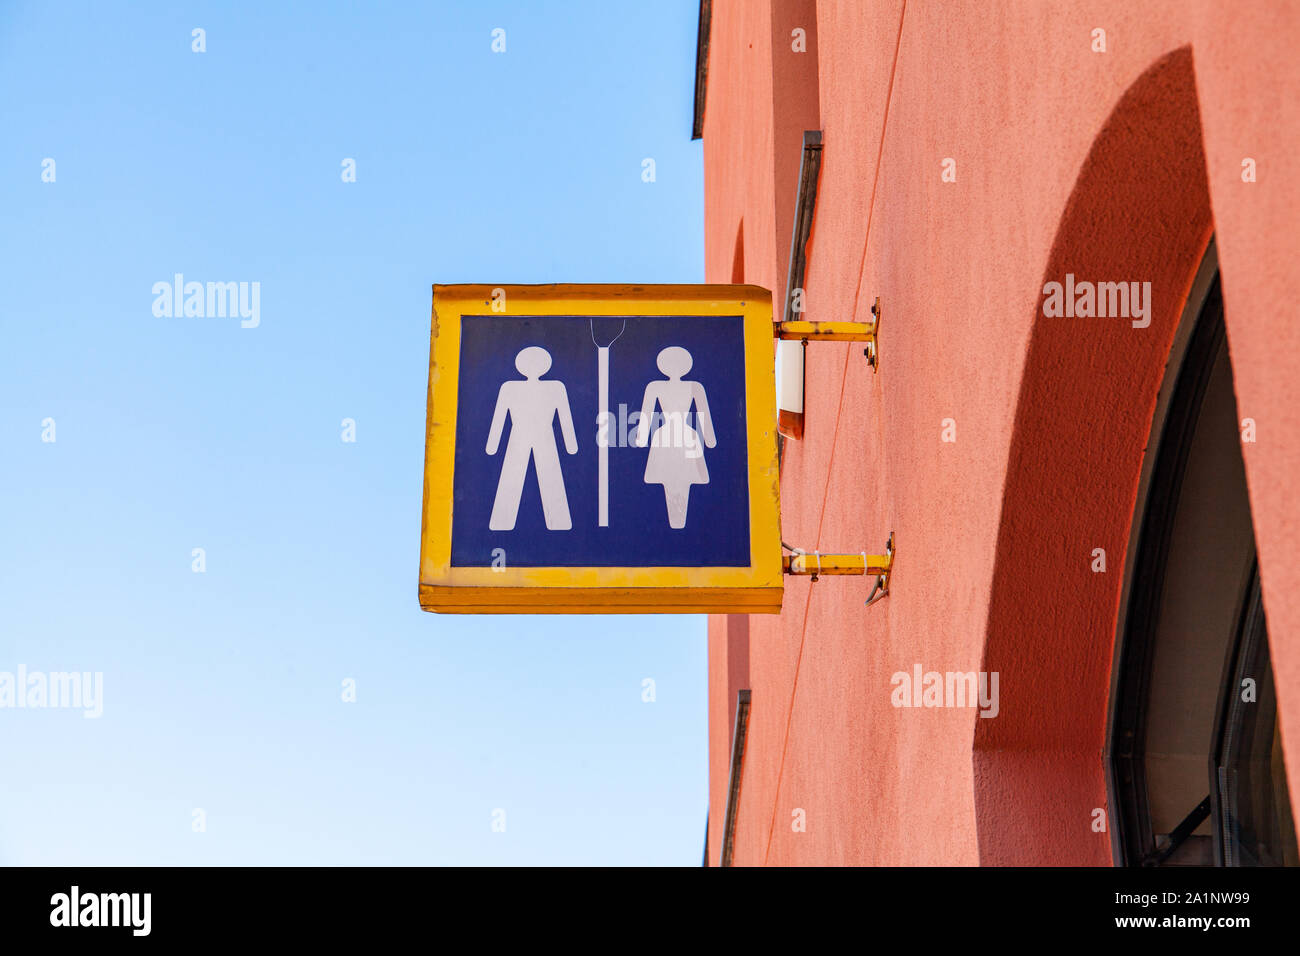 Male and female sign of a public toilet. Gender sign for public bathroom. Stock Photo